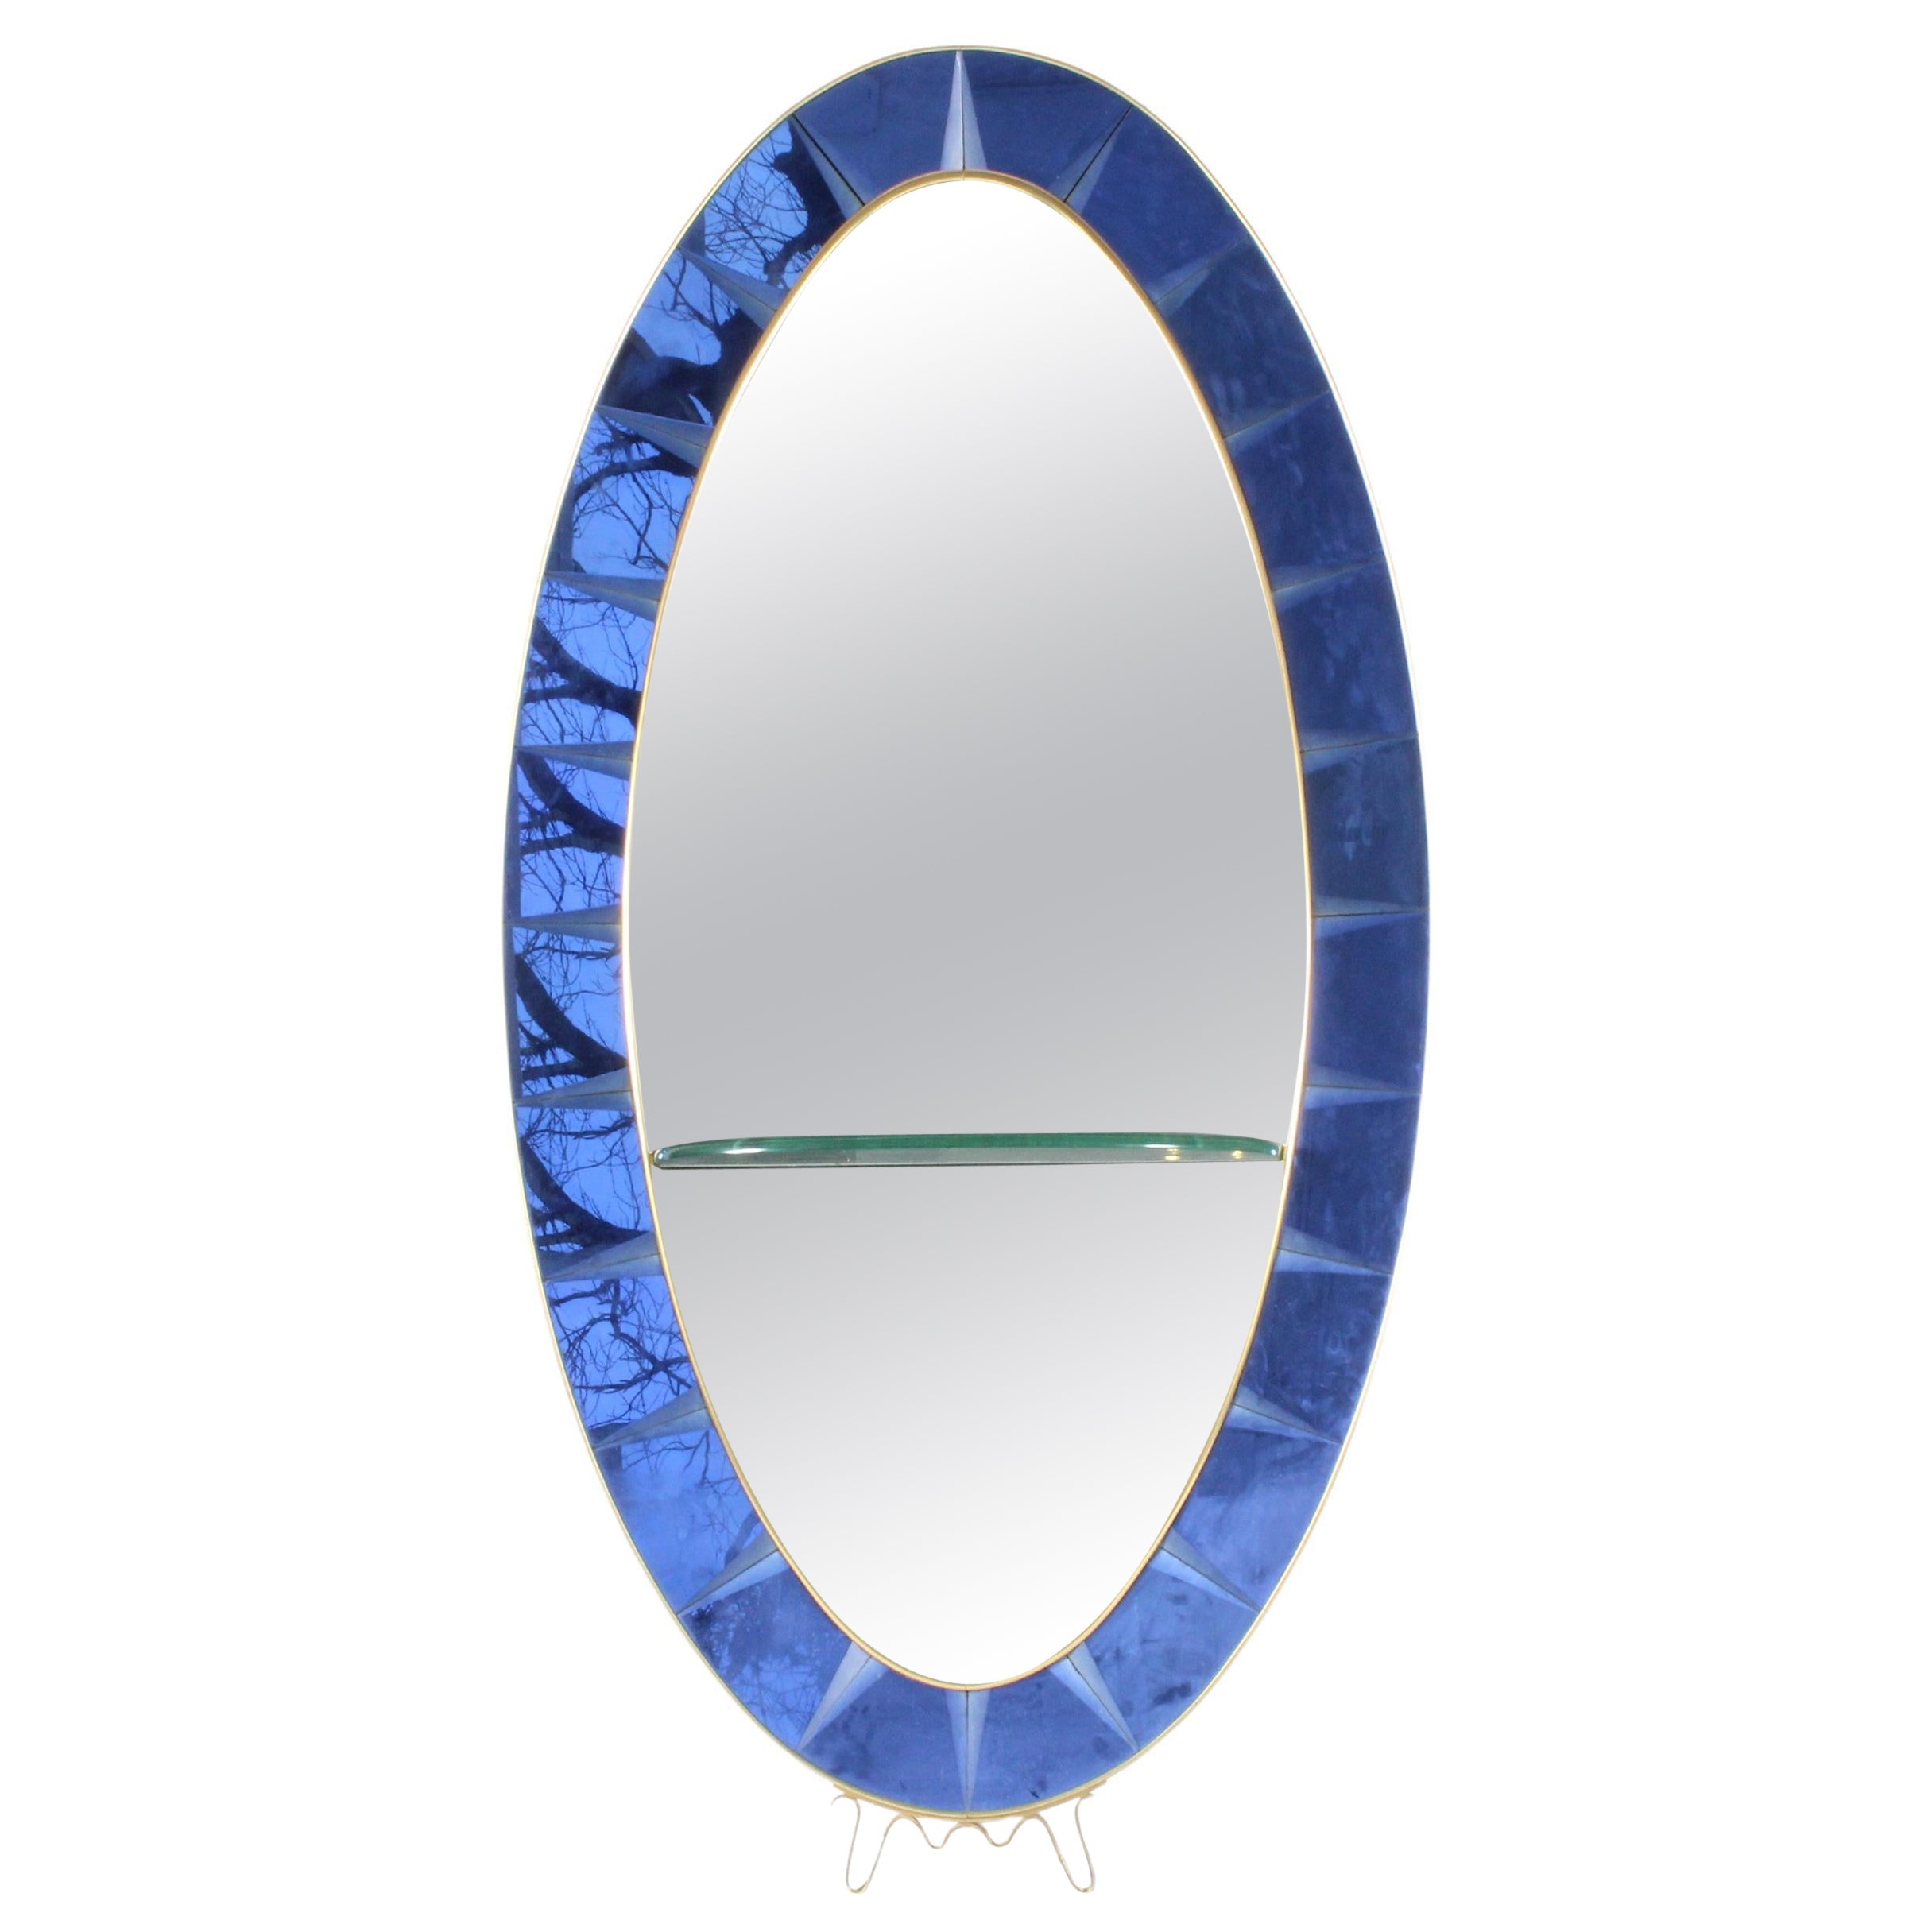 Striking Cobalt Blue Large Oval Cut Glass Floor Mirror By Cristal Arte Of Turin For Sale